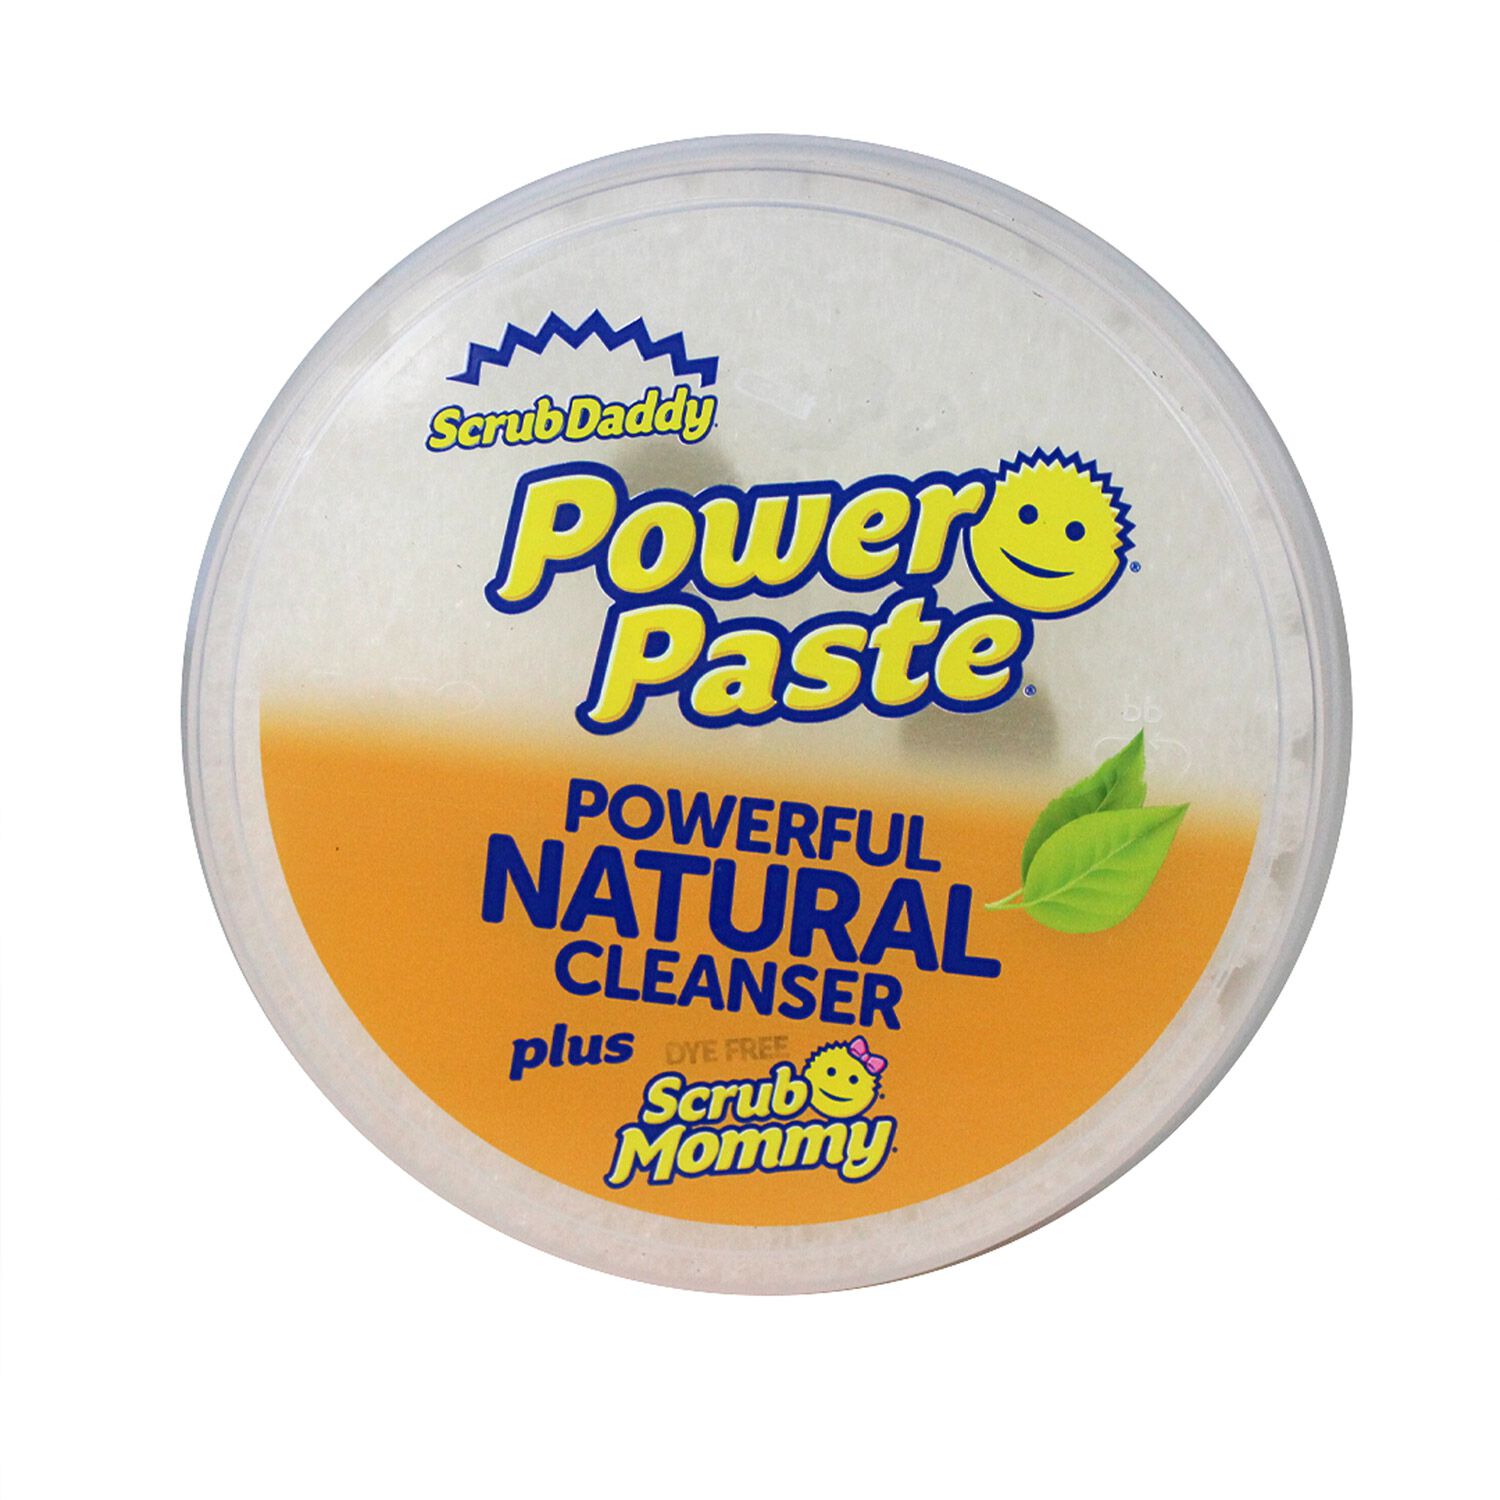 Scrub Daddy UK on X: Power Paste is a powerful natural paste for